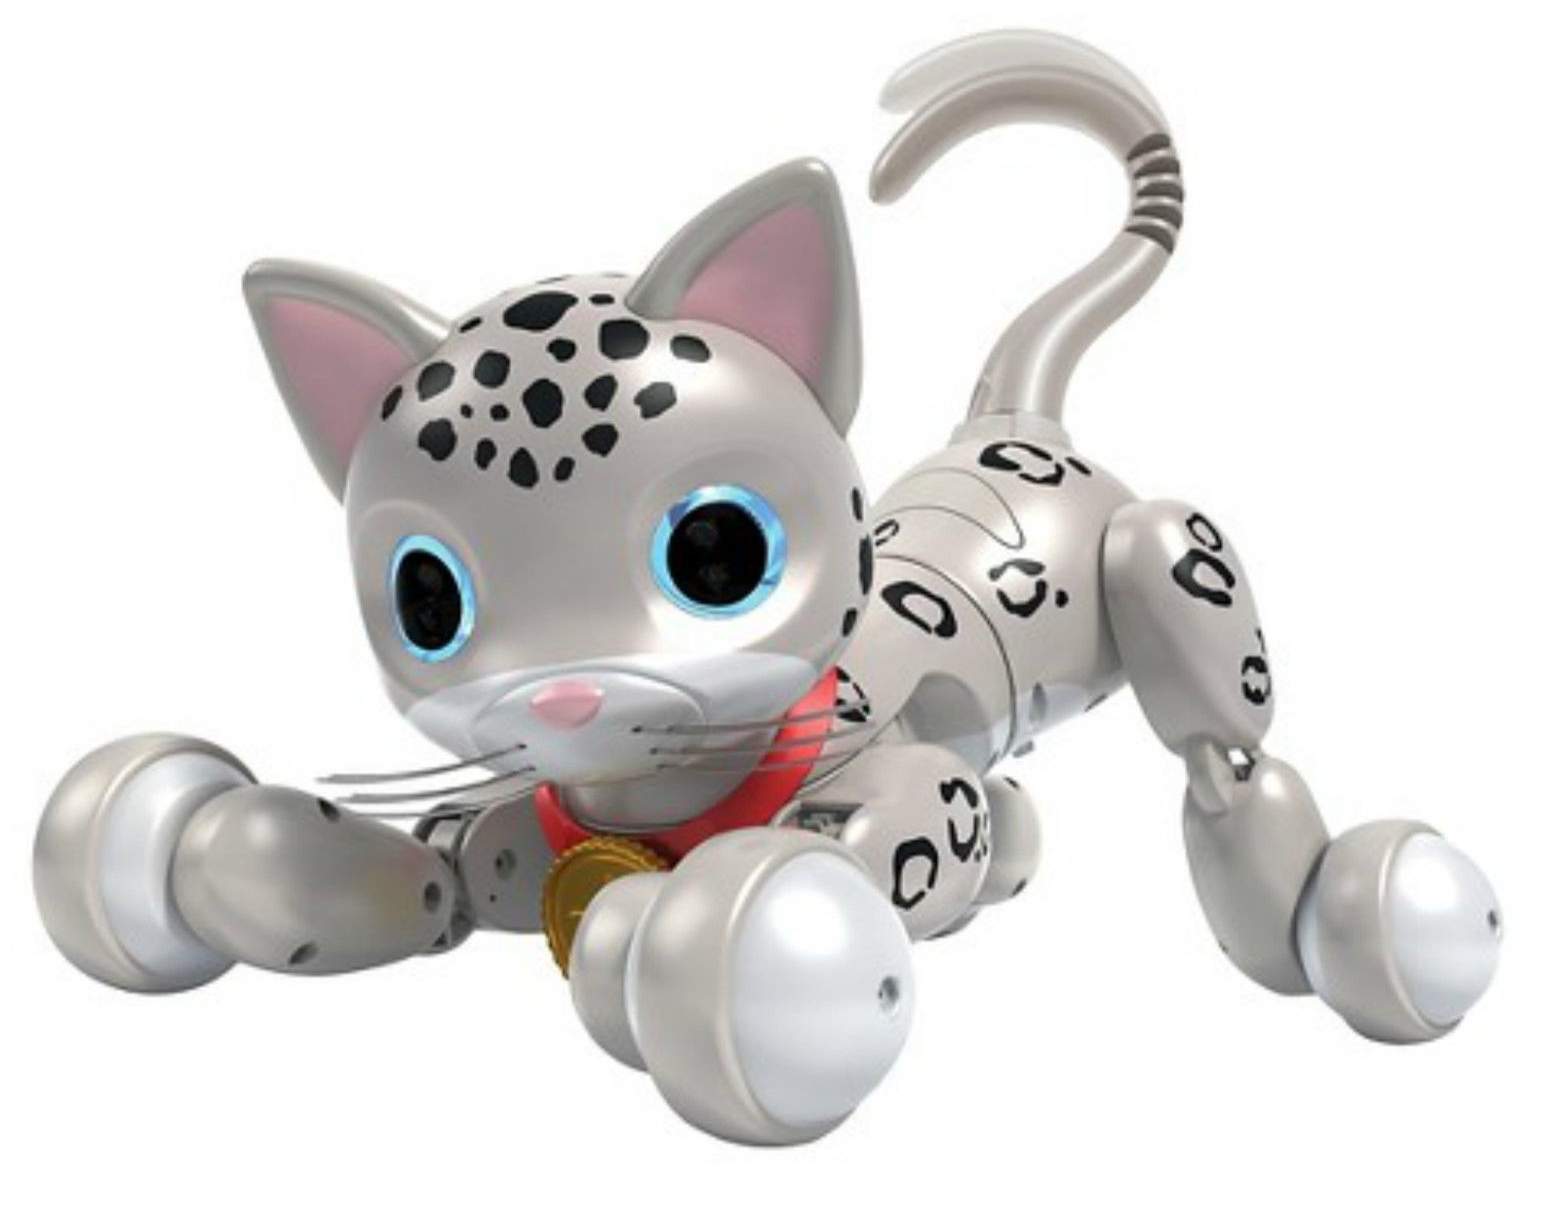 robot cat toy zoomer